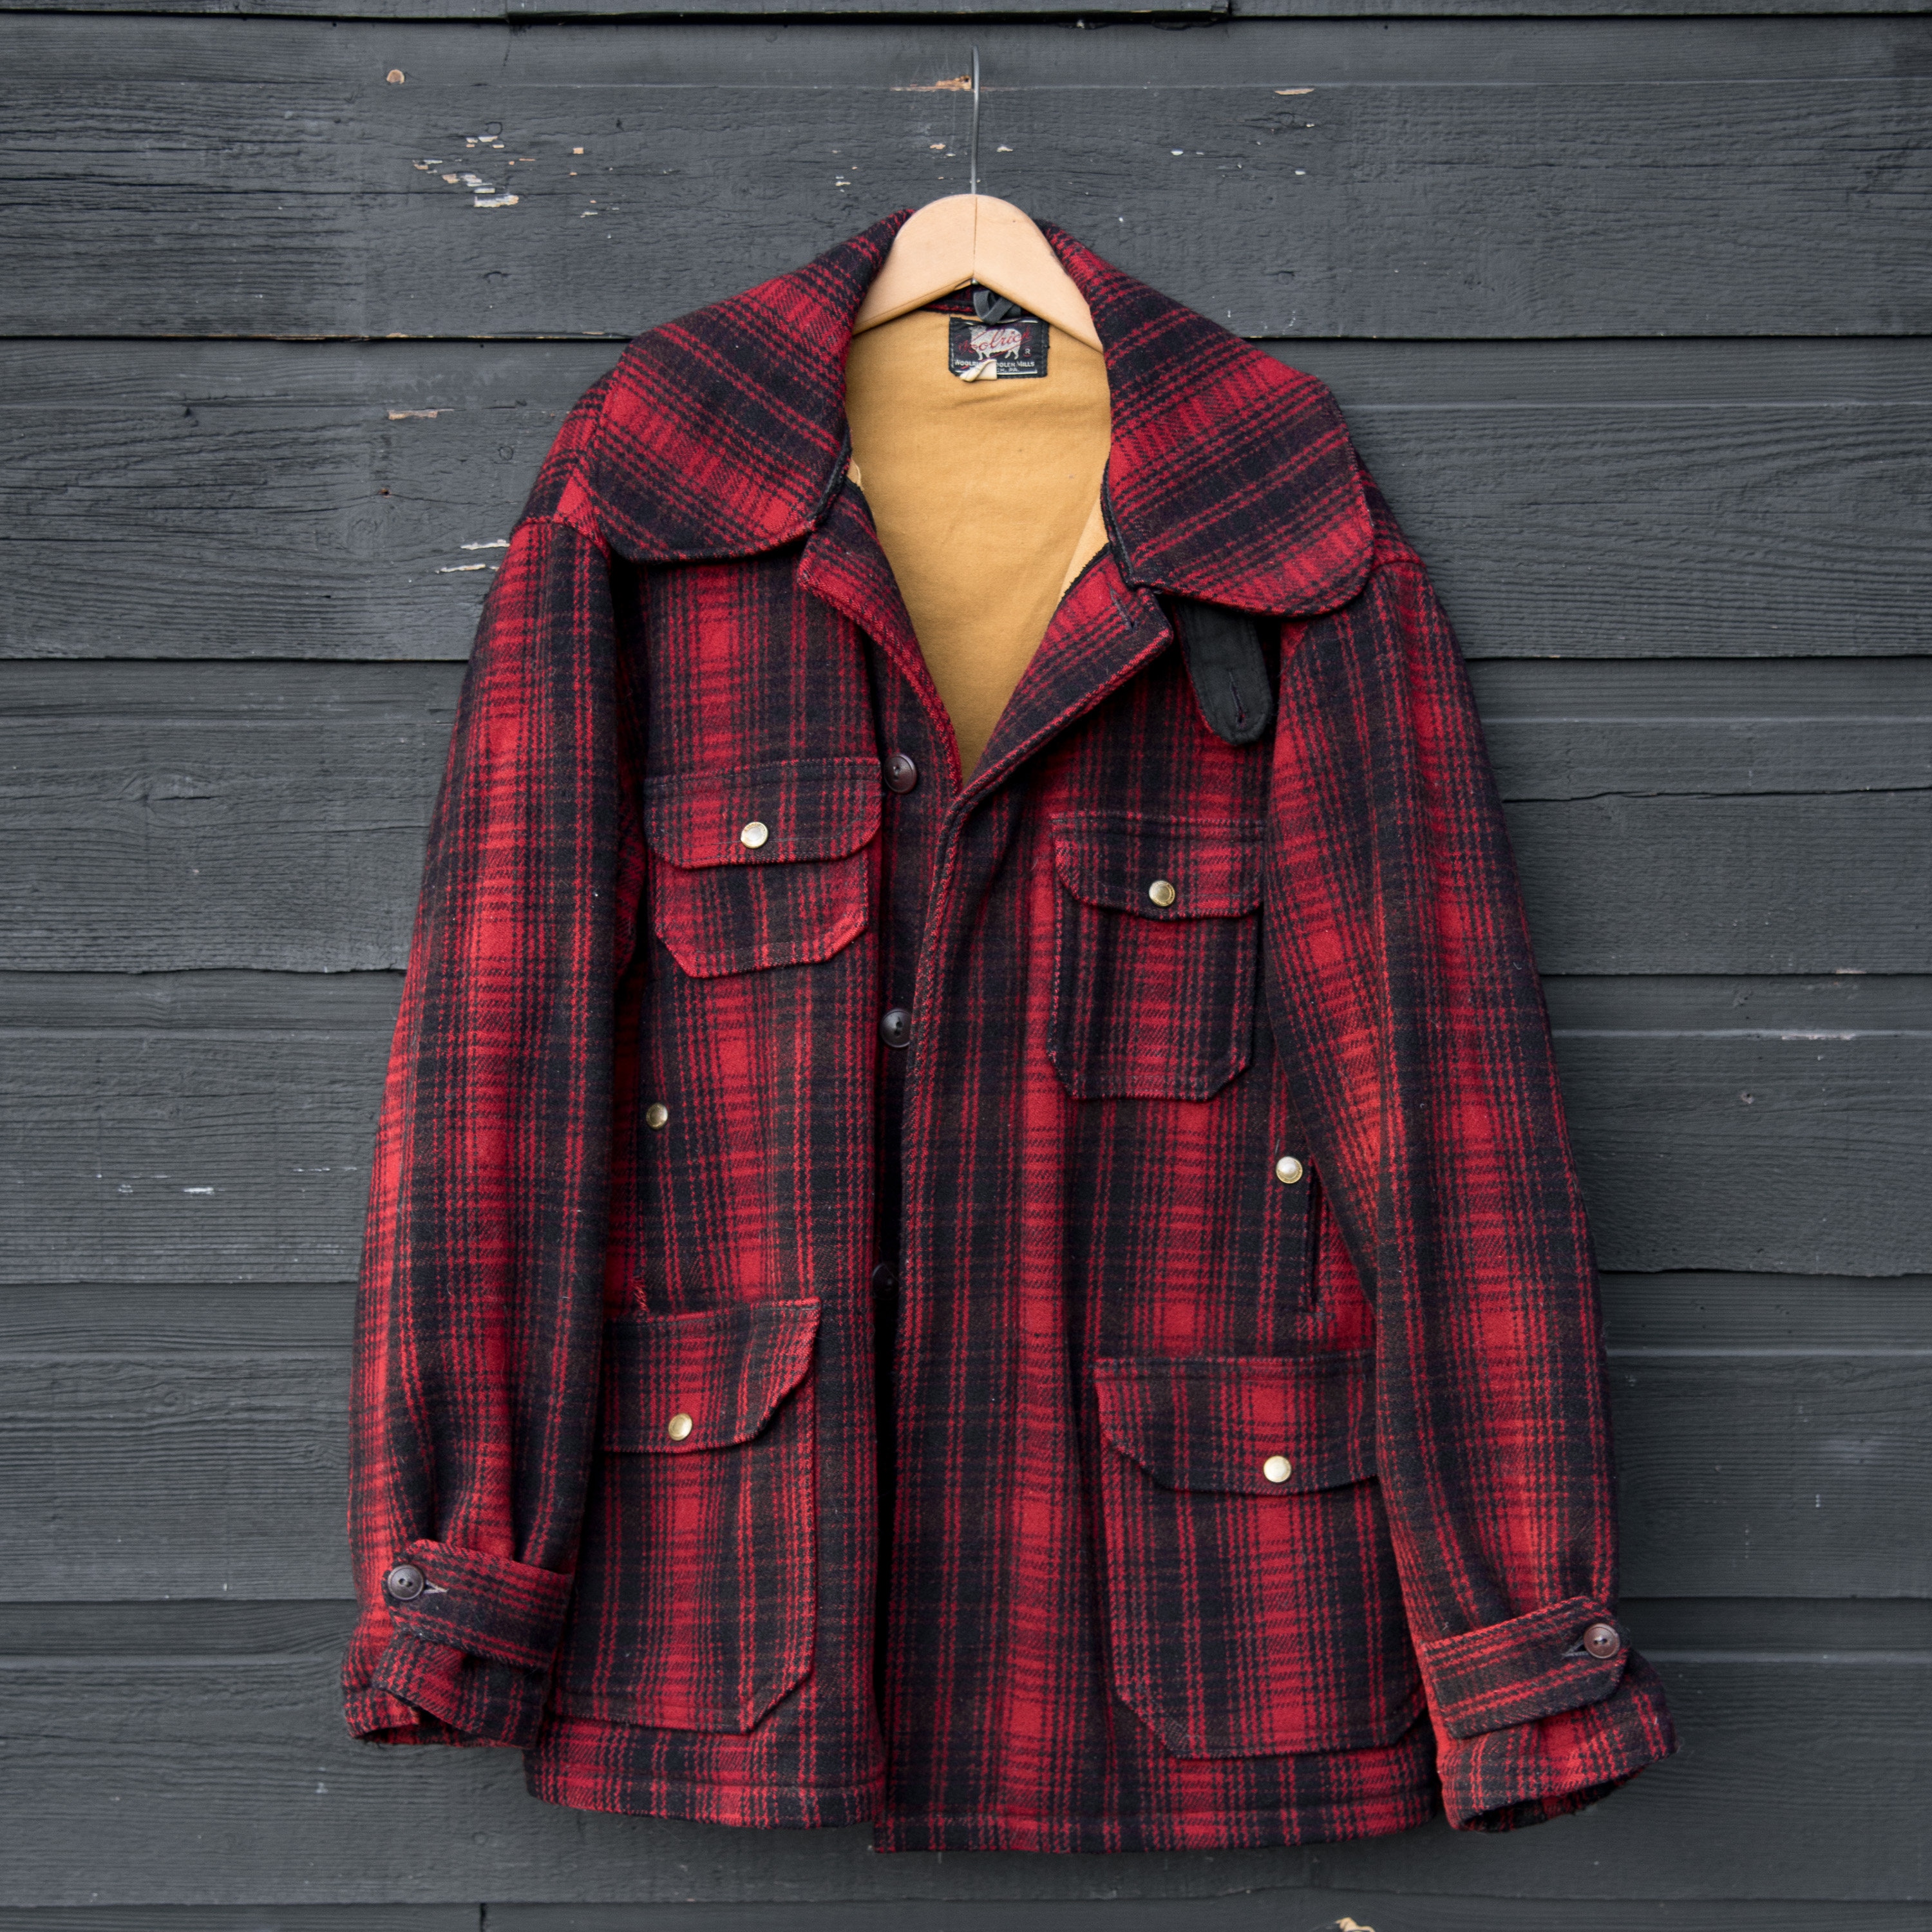 40s 50s Vintage Woolrich Coat, Red and Black Mackinaw Plaid Wool